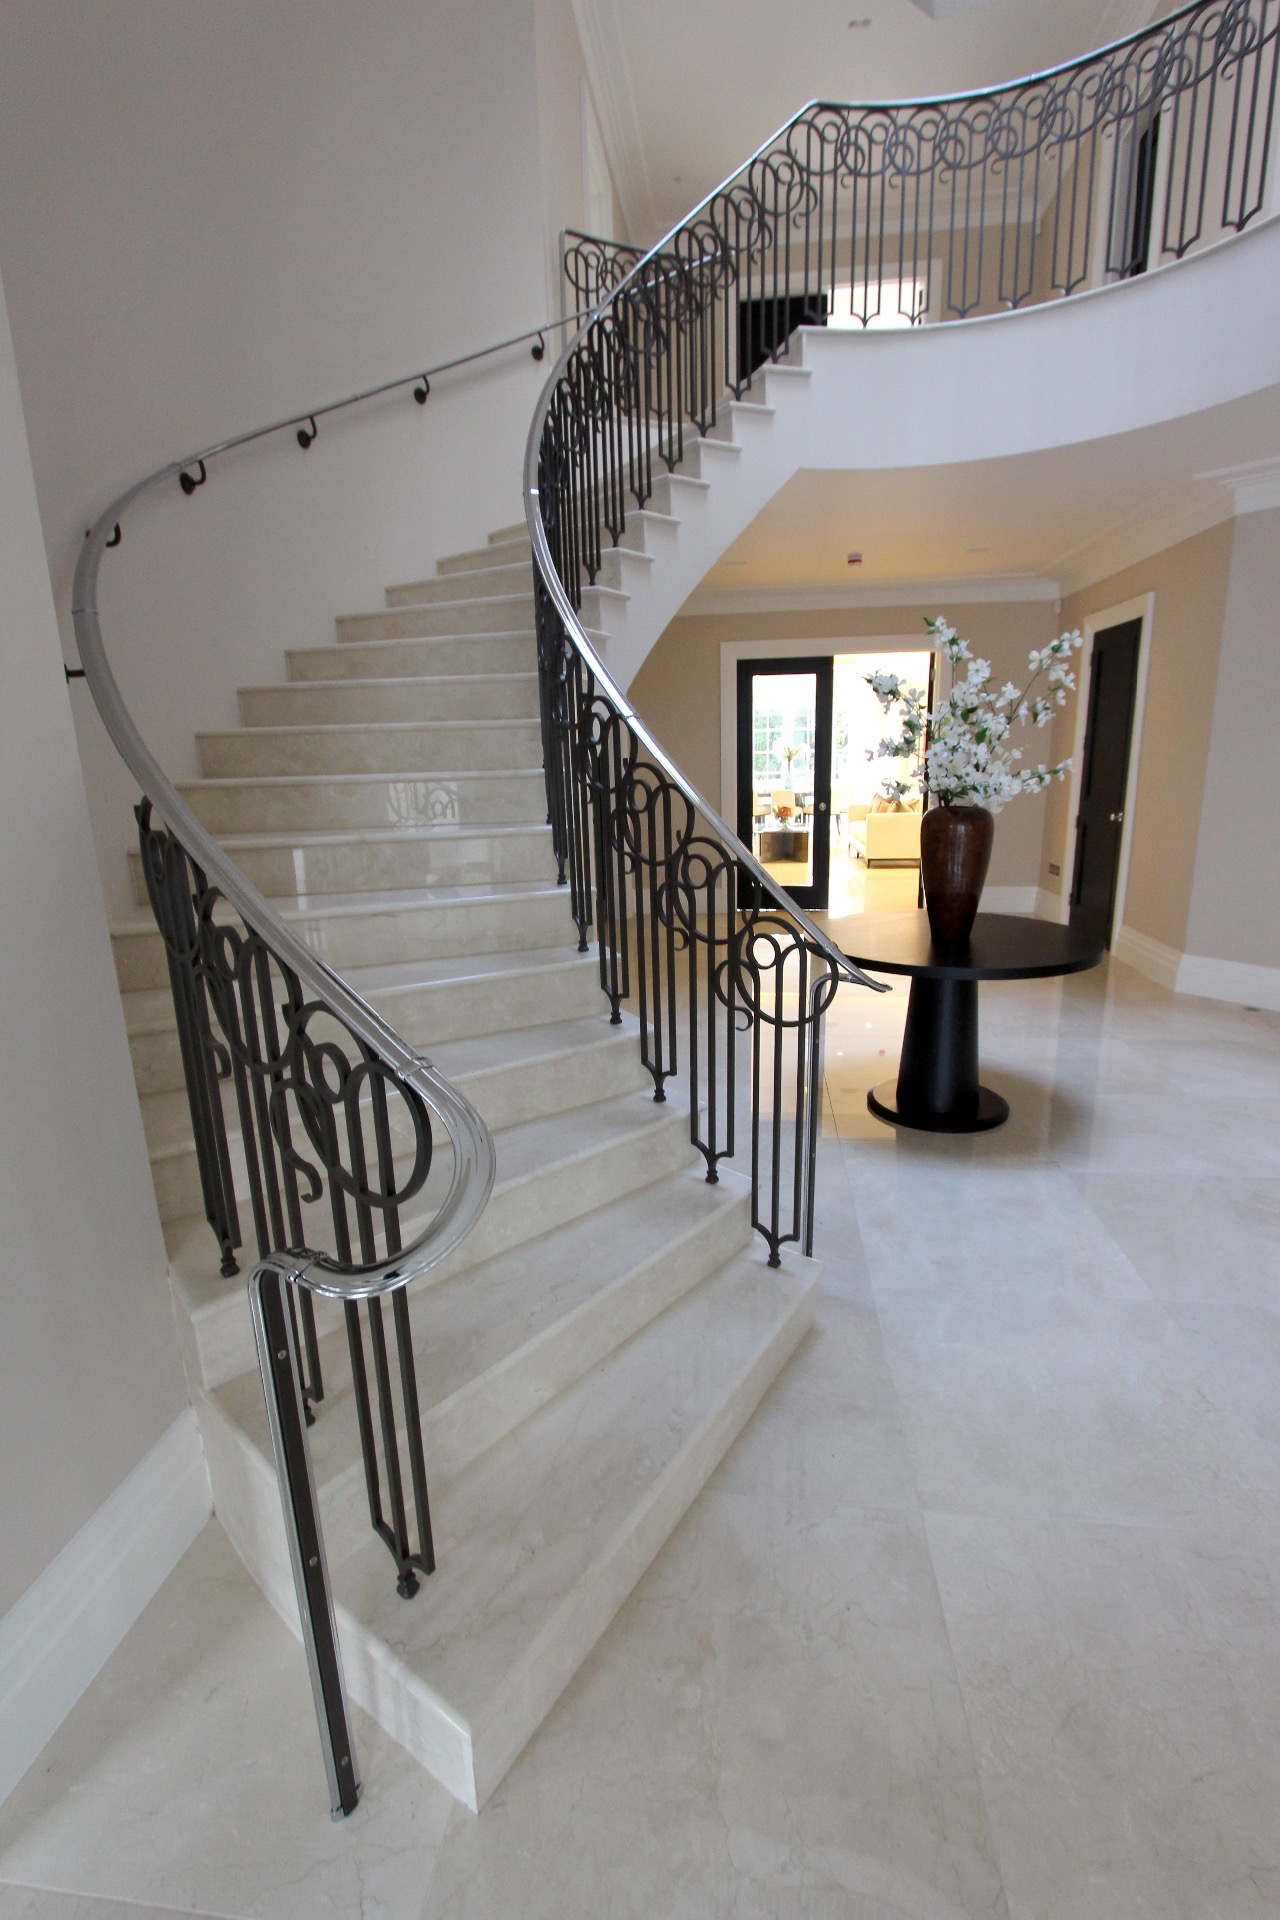 Milbank Concrete Products are proud to introduce – Kallisto Stairs.